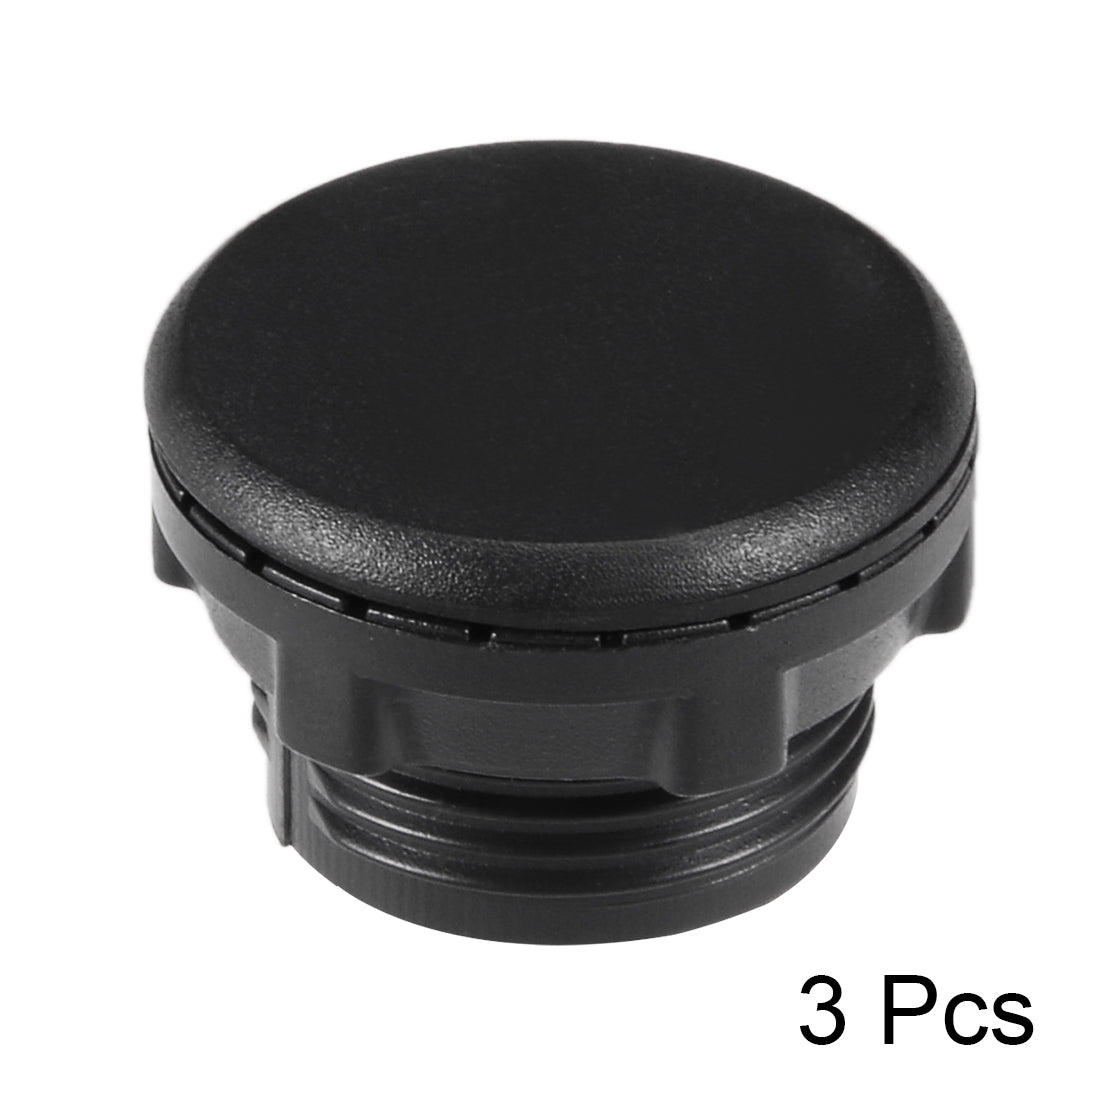 uxcell Uxcell 3 Pcs 22mm Black Plastic Push Button Switch Hole Panel Plug